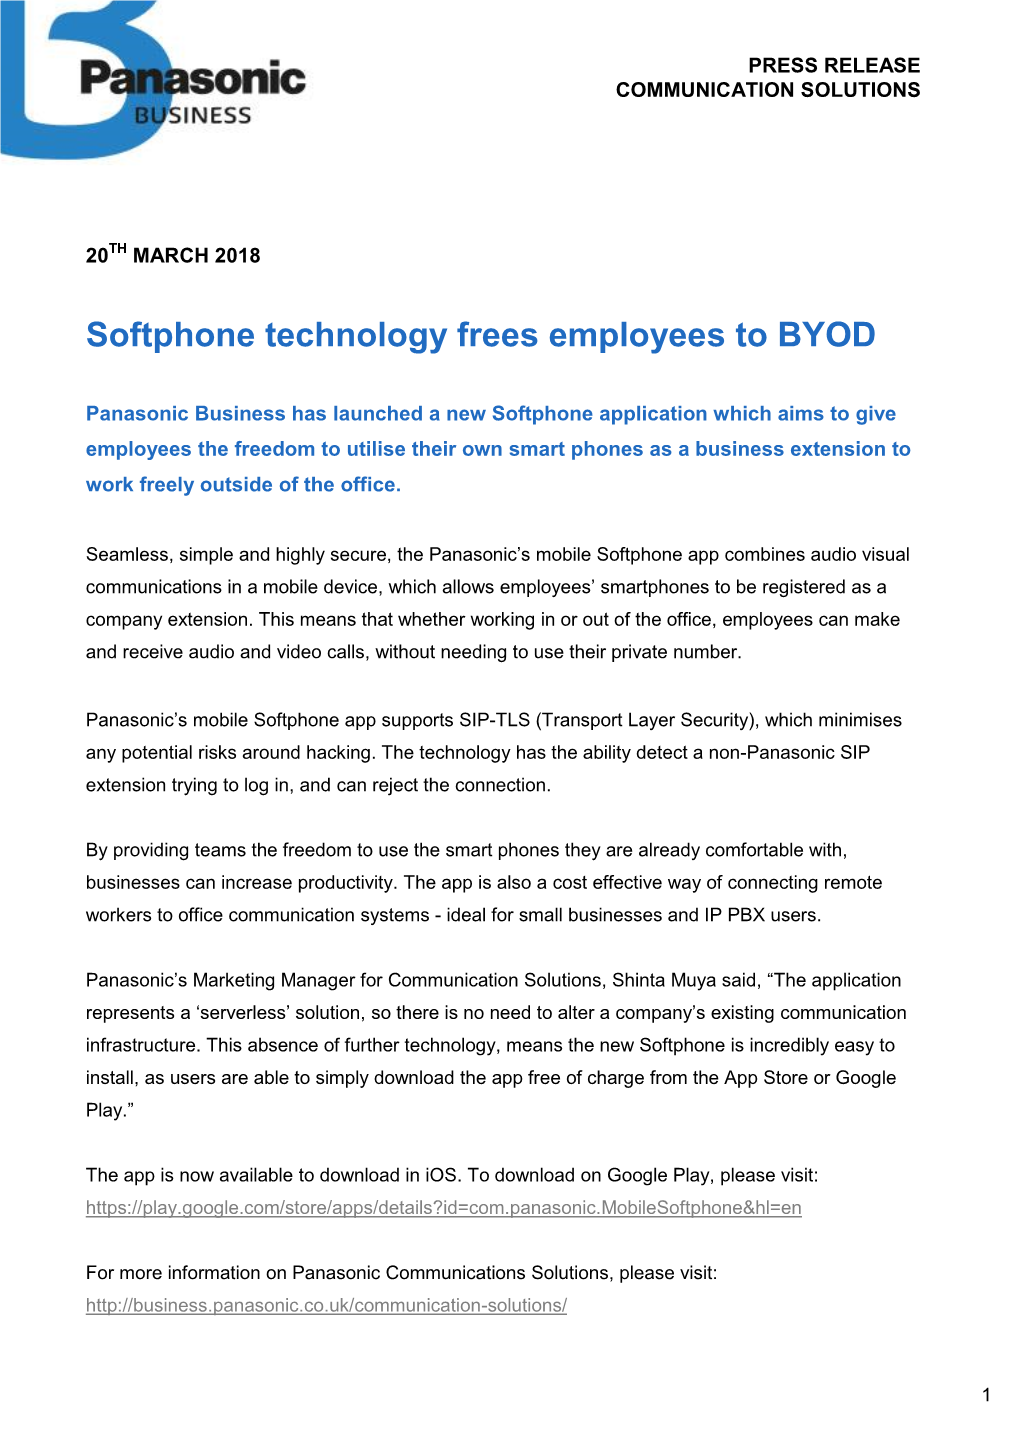 Softphone Technology Frees Employees to BYOD